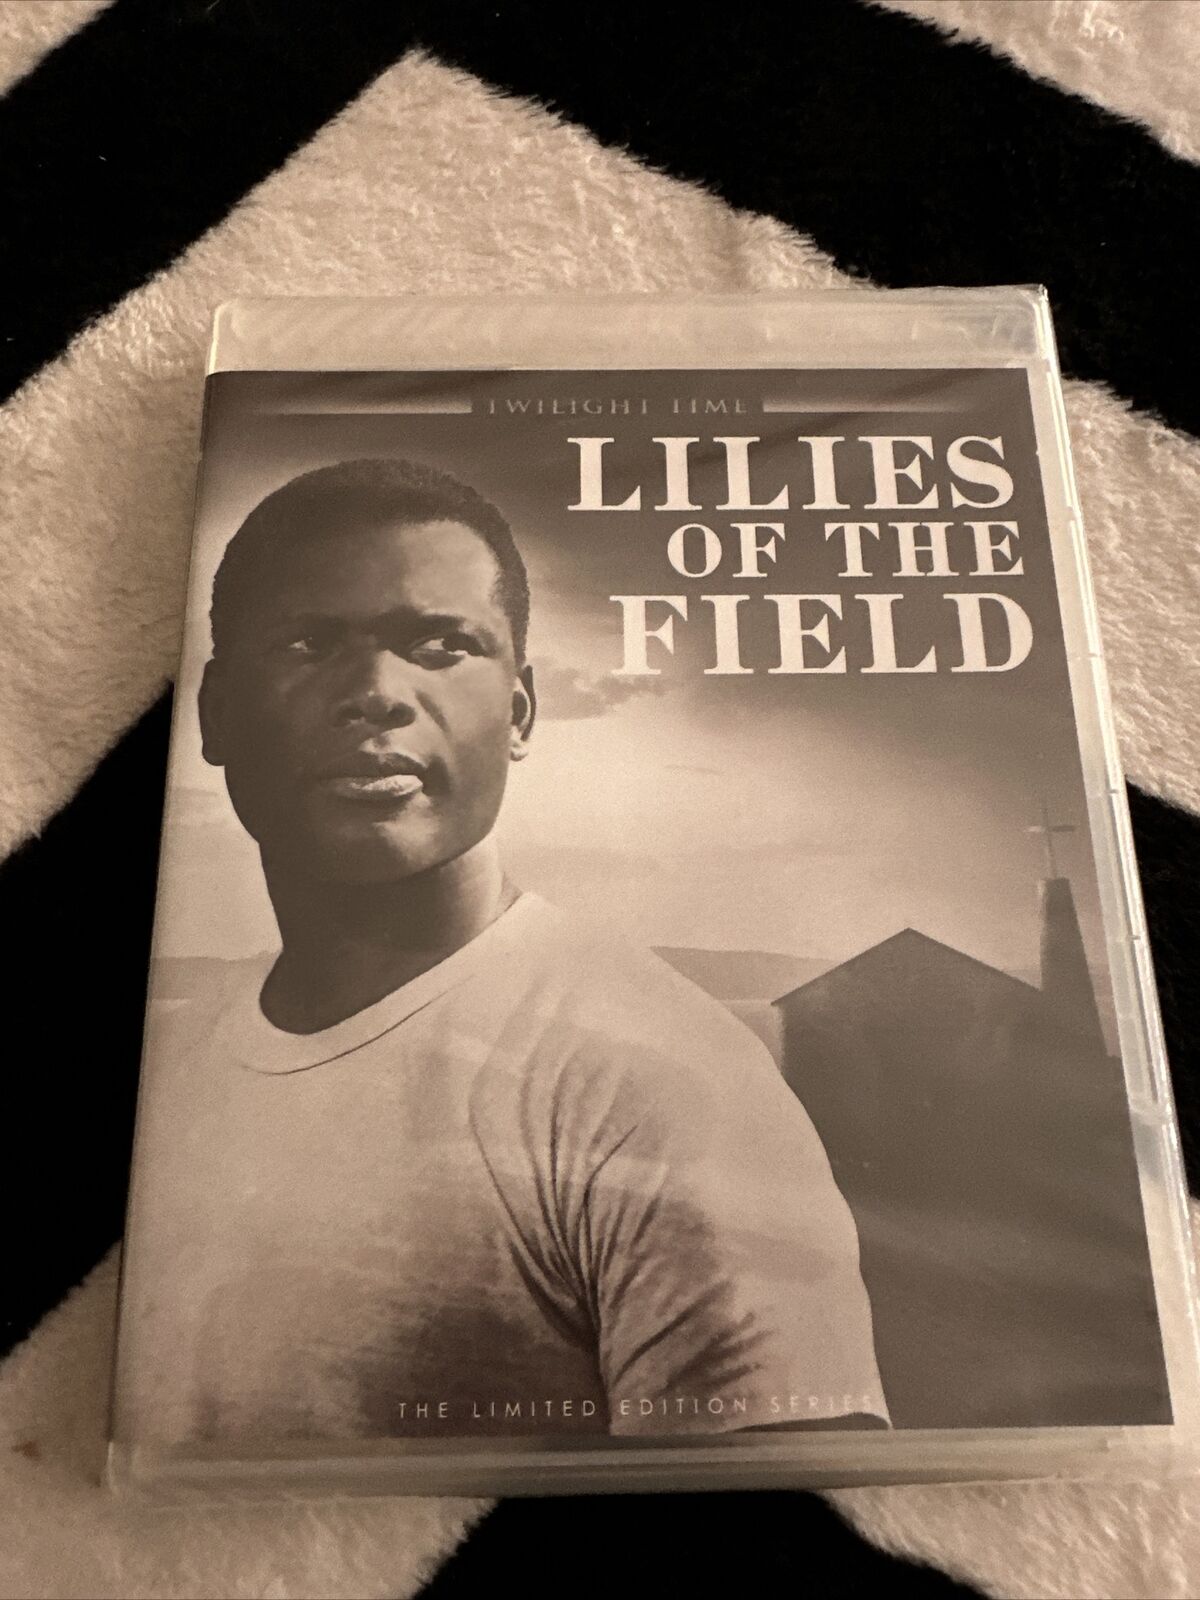 Lilies Of The Field (Twilight Time Blu-ray). NEW Sidney Poitier OOP RARE SEALED